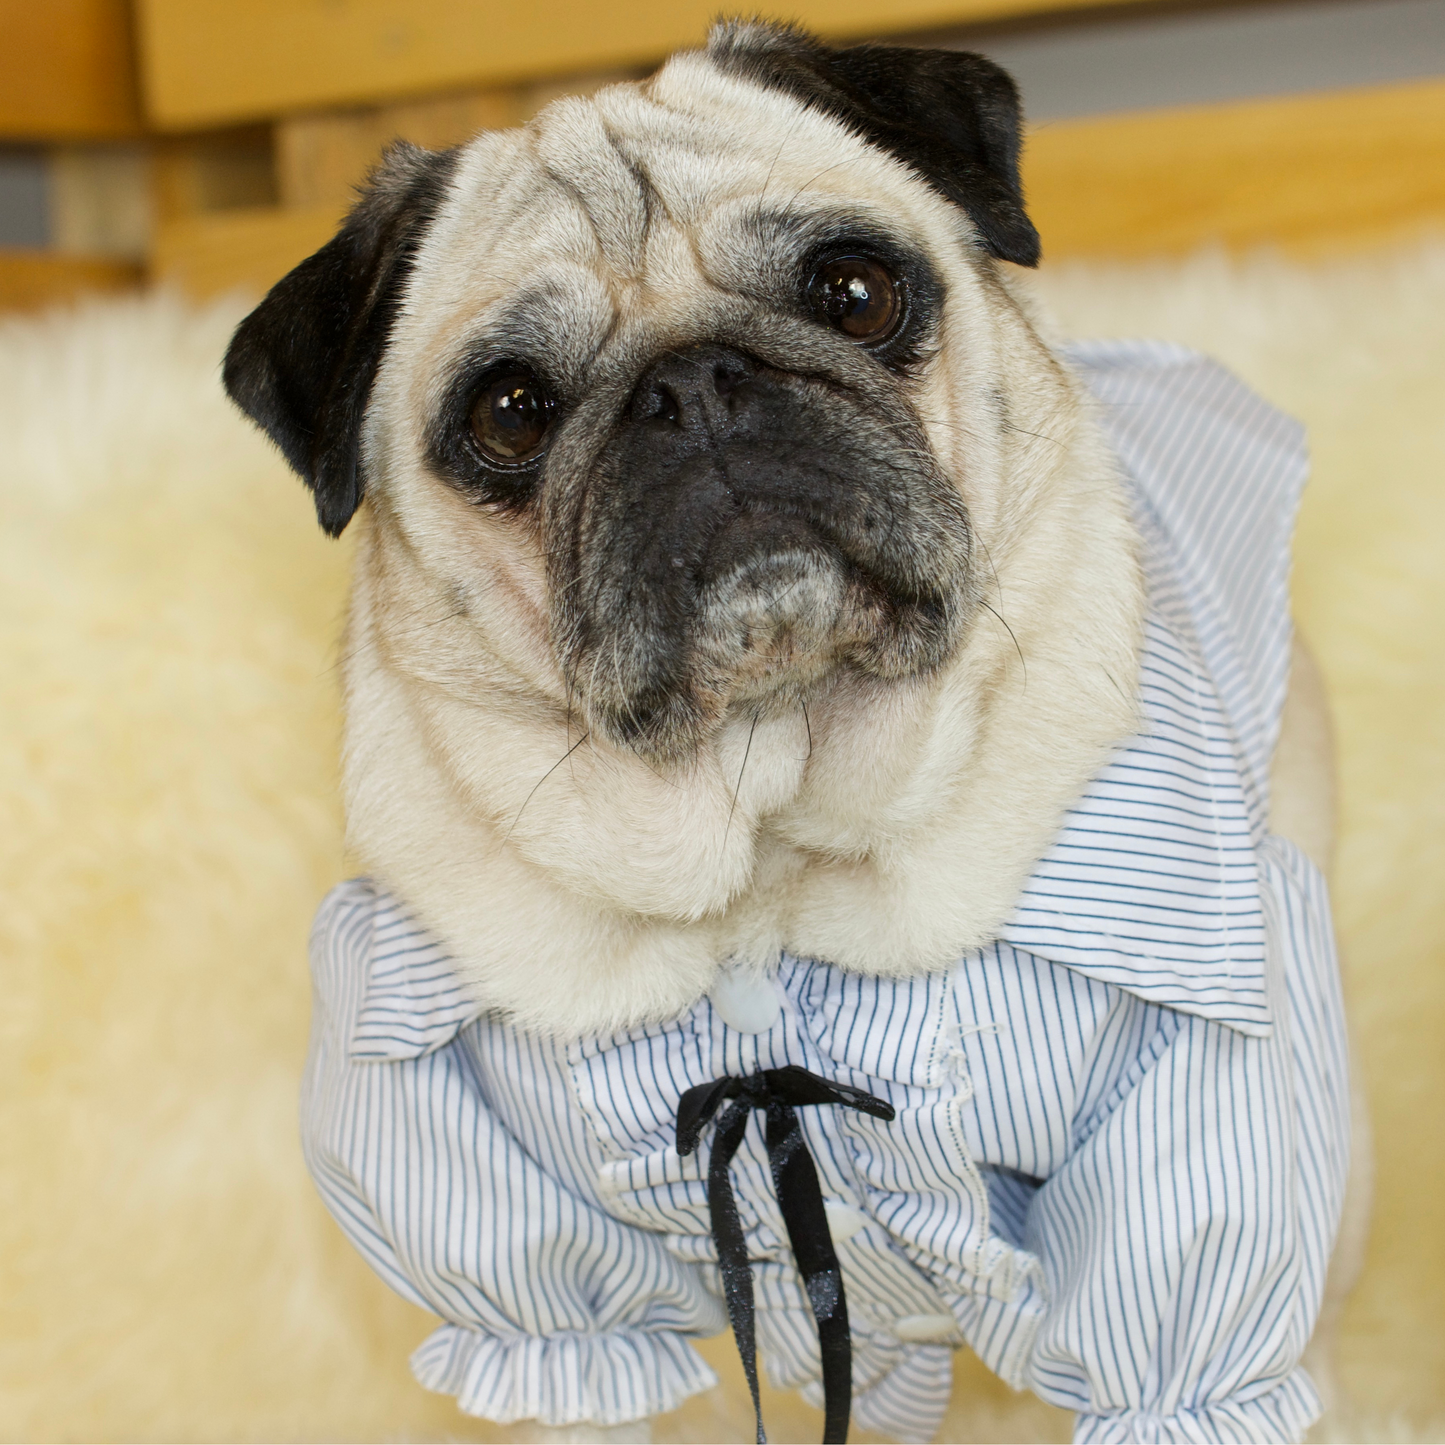 A fawn female pug is wearing a Blue Striped Cotton Shirt